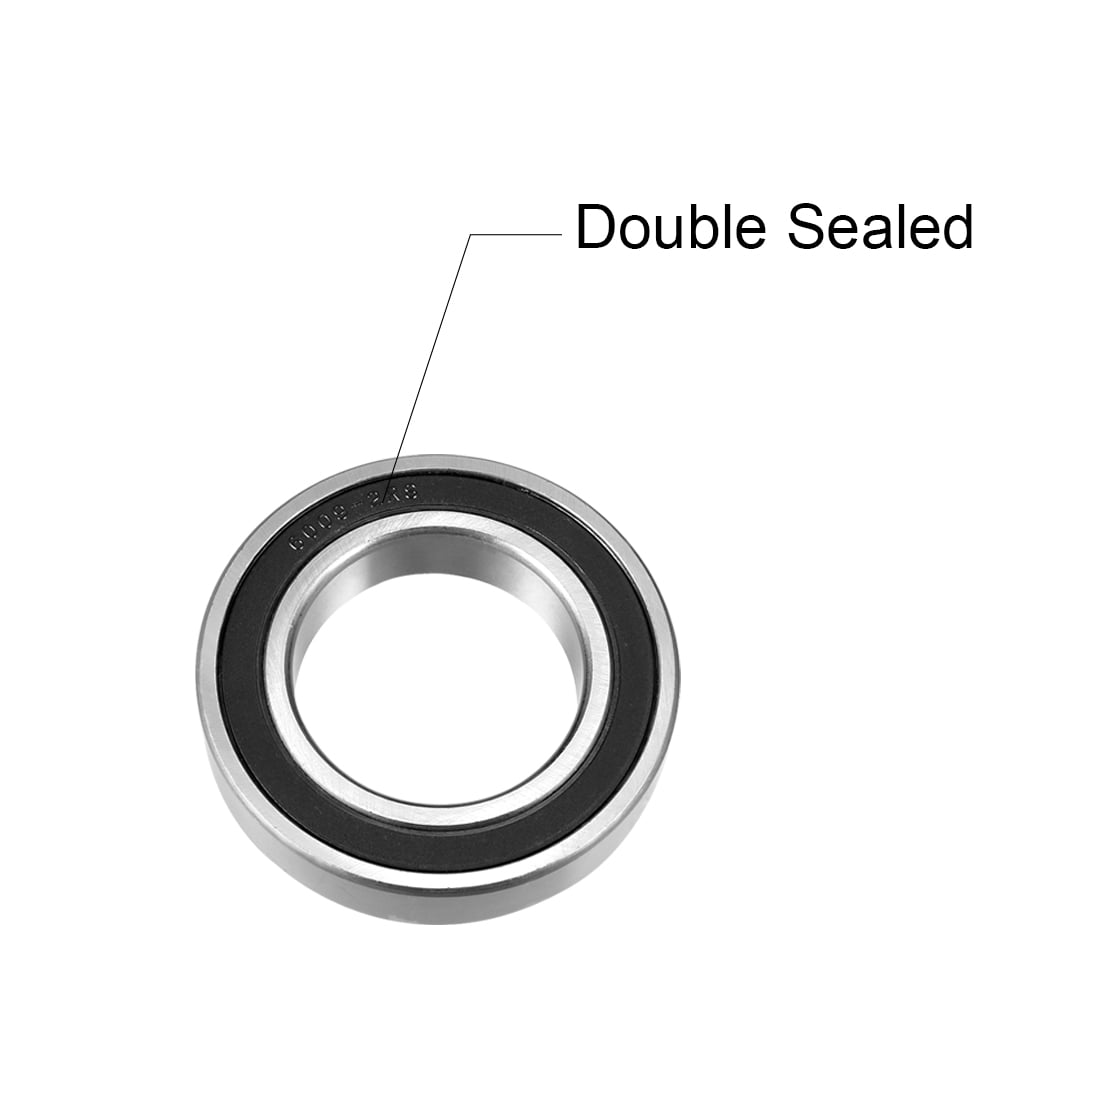 RADIAL BALL BEARING DOUBLE SEALED 6009RS,45mmX75mmX16mm 6009-2RS 